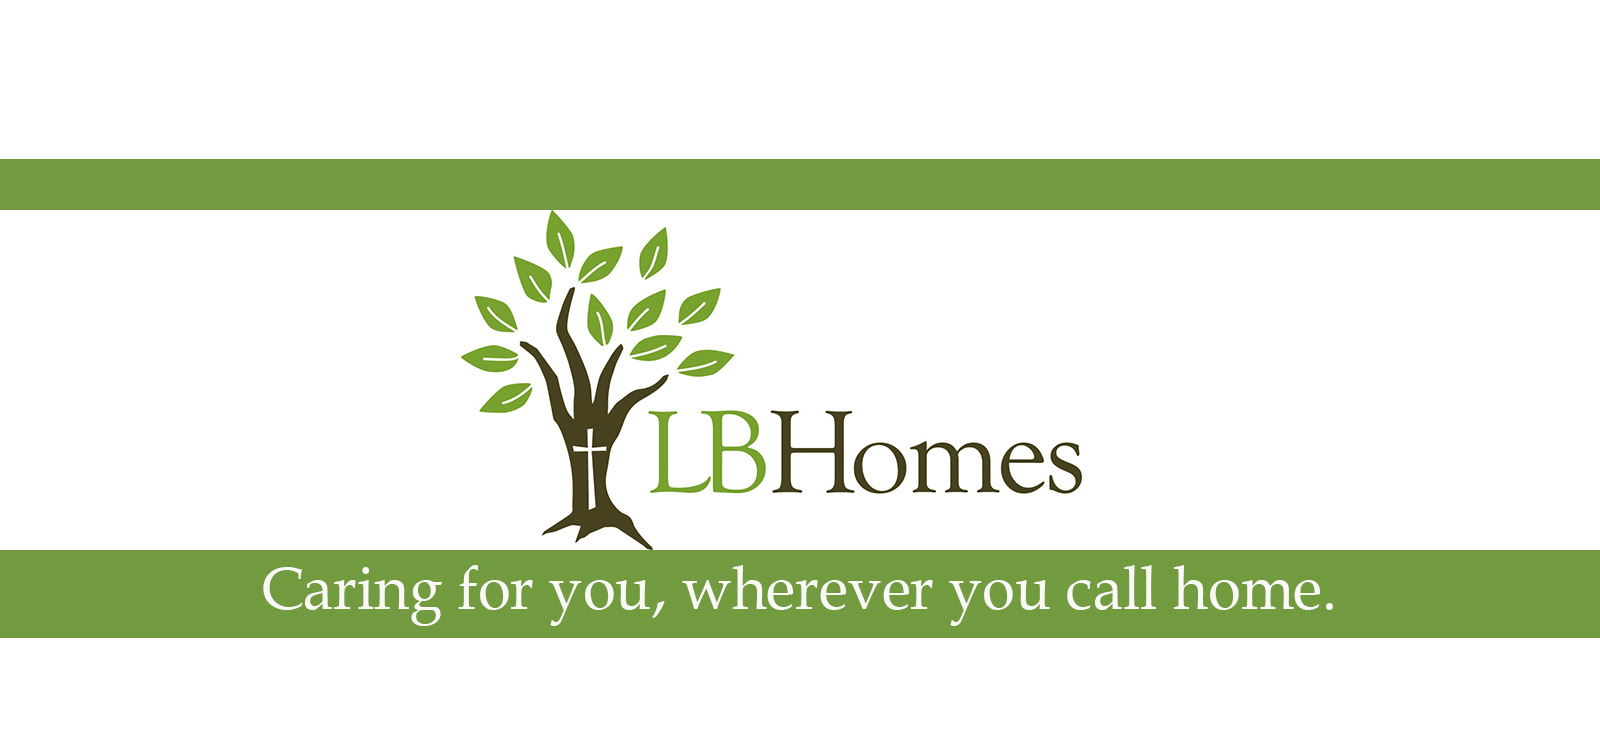 Great senior living facilities and services at LB Homes in Fergus Falls, Minnesota.